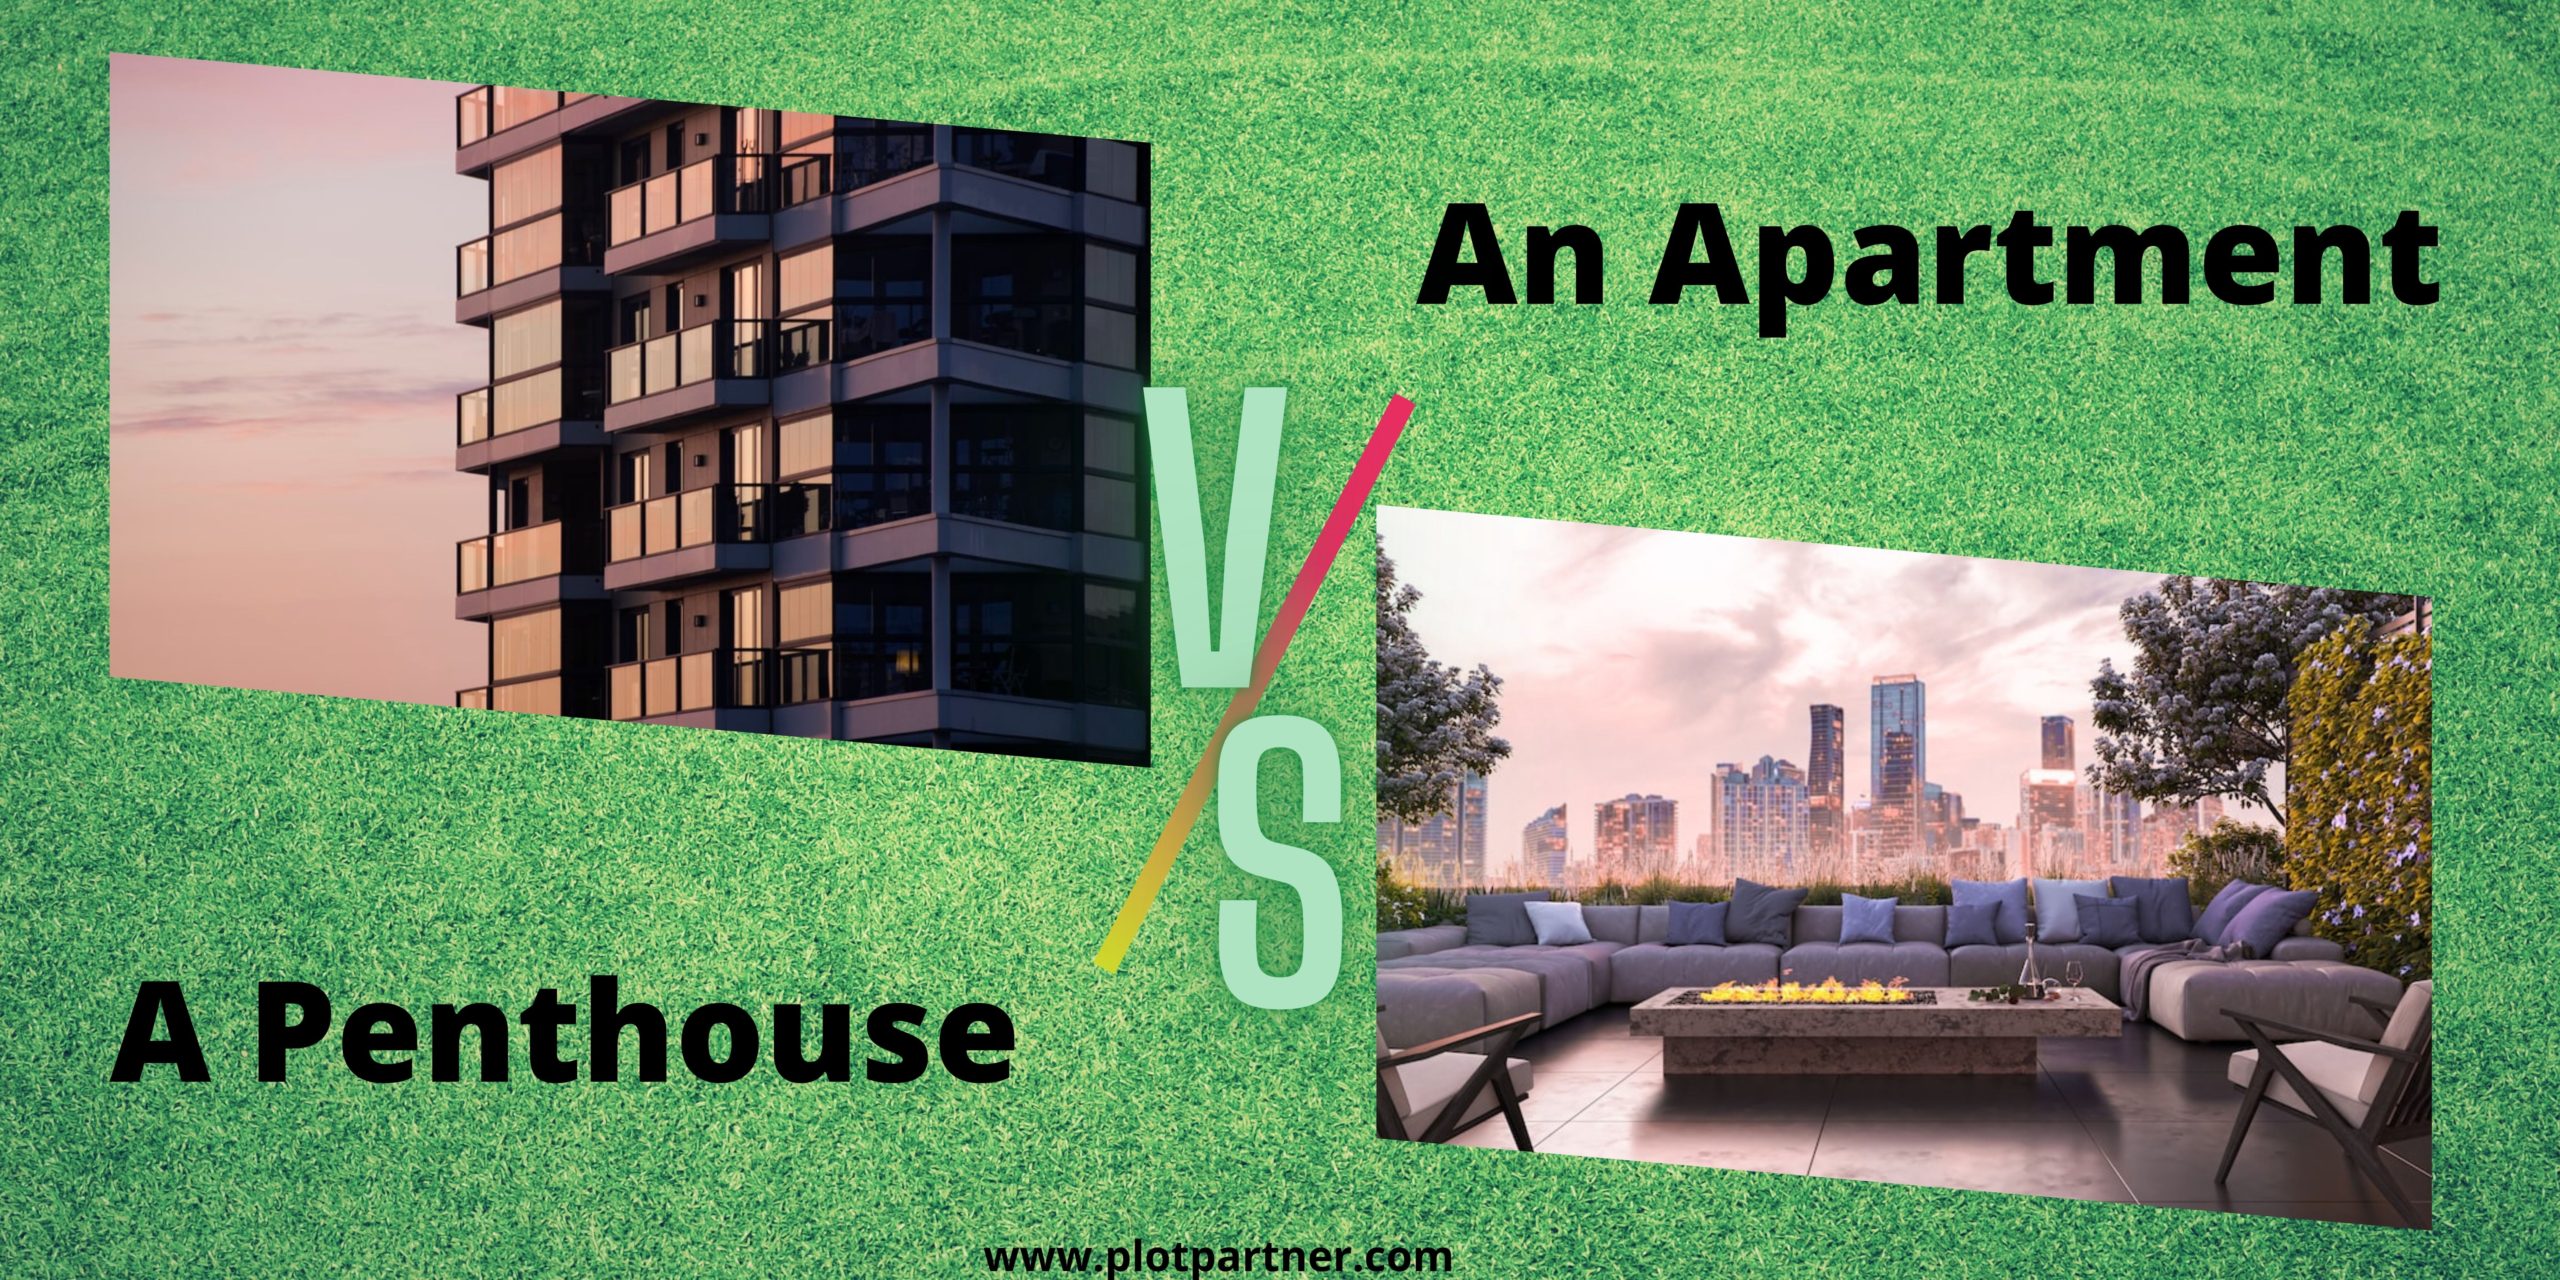 An Apartment vs A Penthouse - Which One is Right for You?